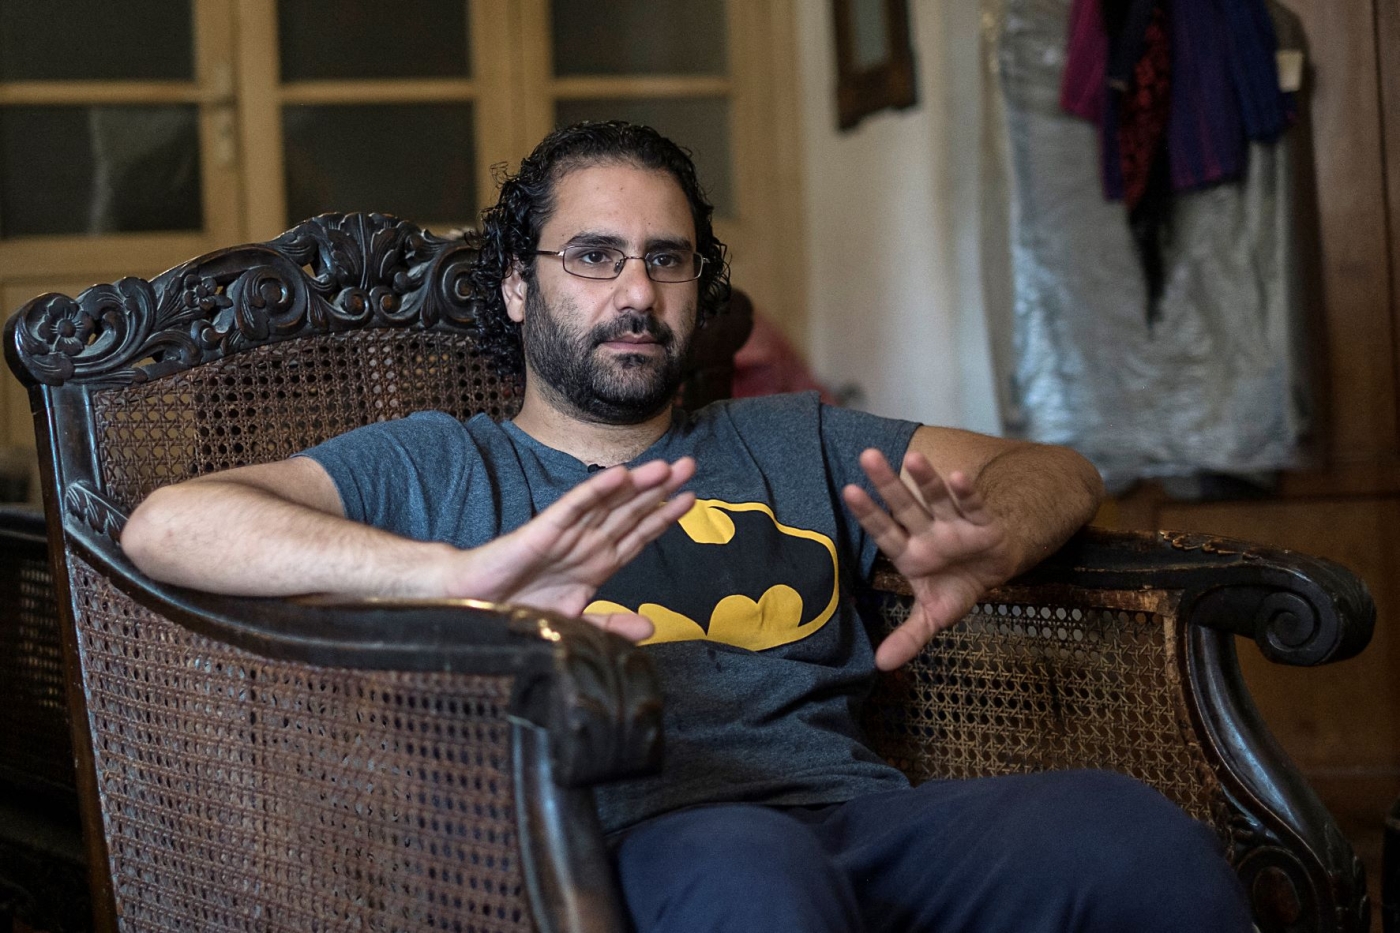 Egyptian activist and blogger Alaa Abdel Fattah gives an interview at his home in Cairo on May 17, 2019 (AFP)